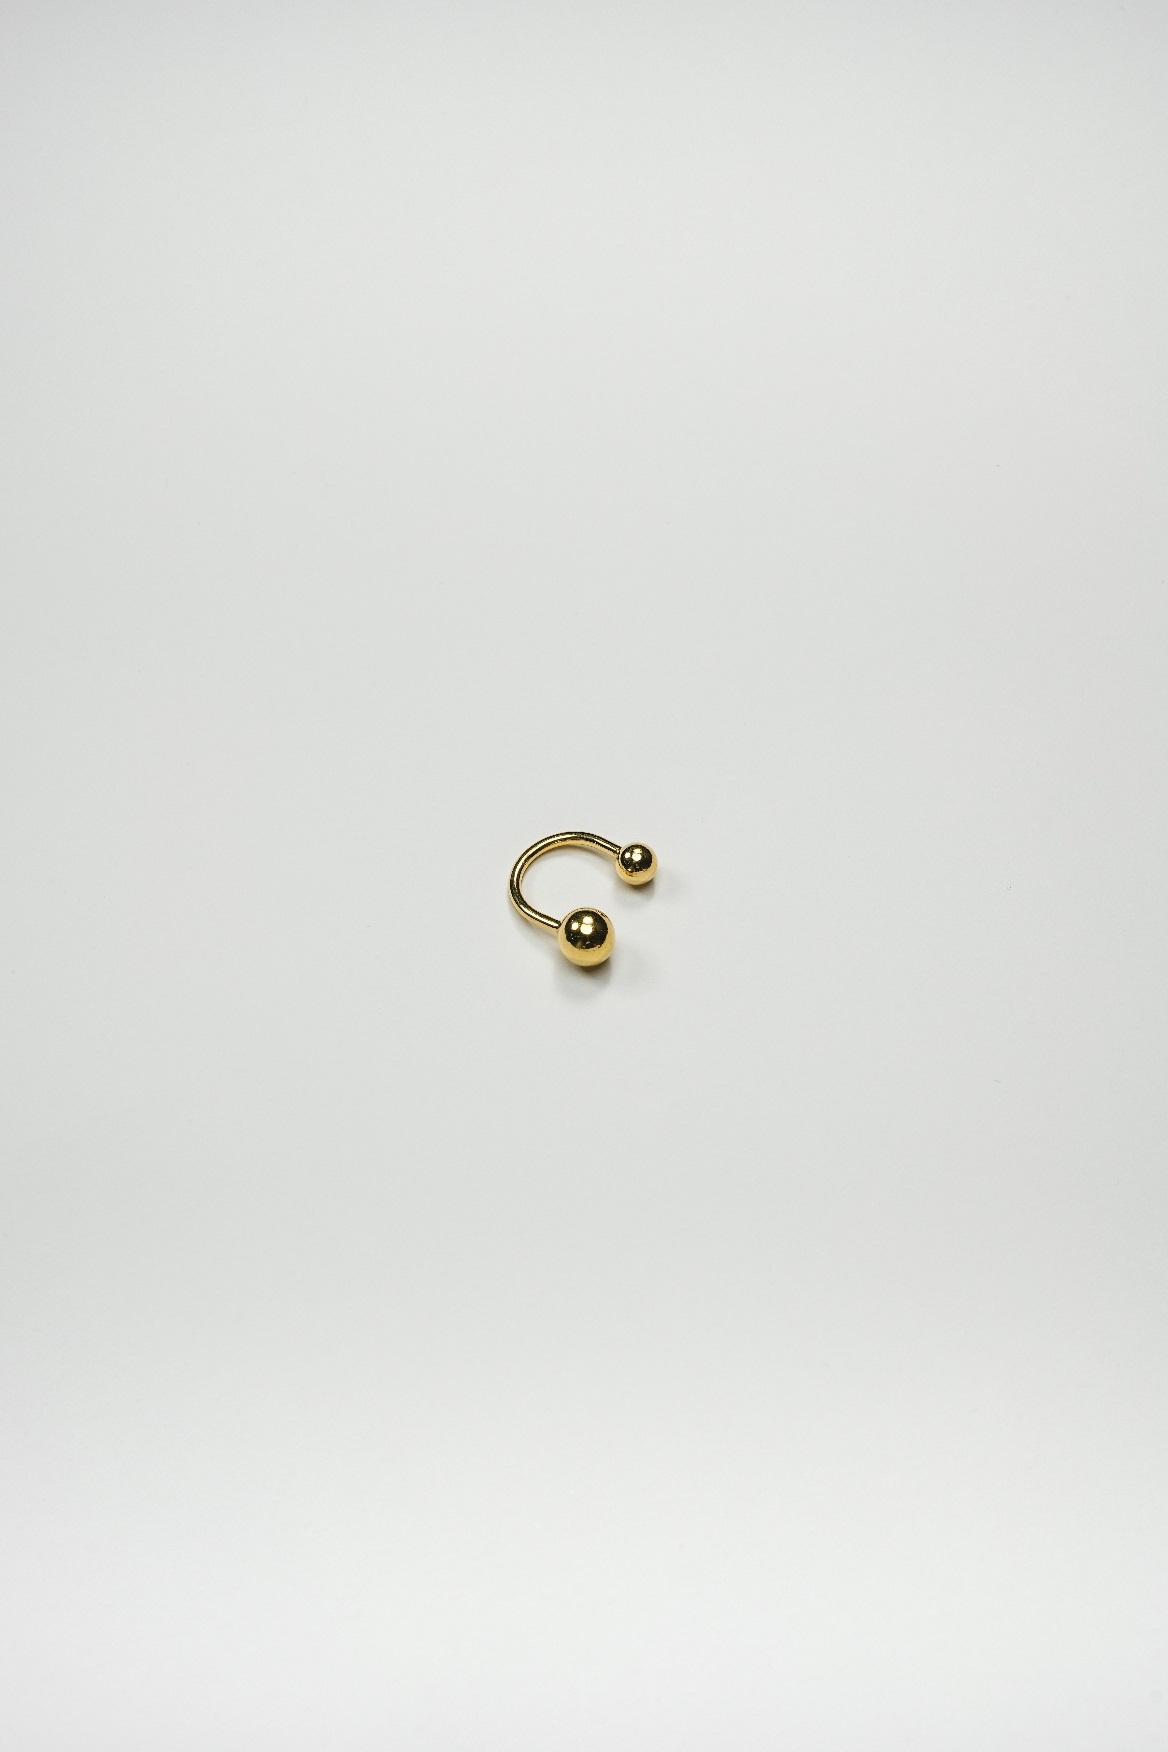 24K yellow gold vermeil ring in 925 silver